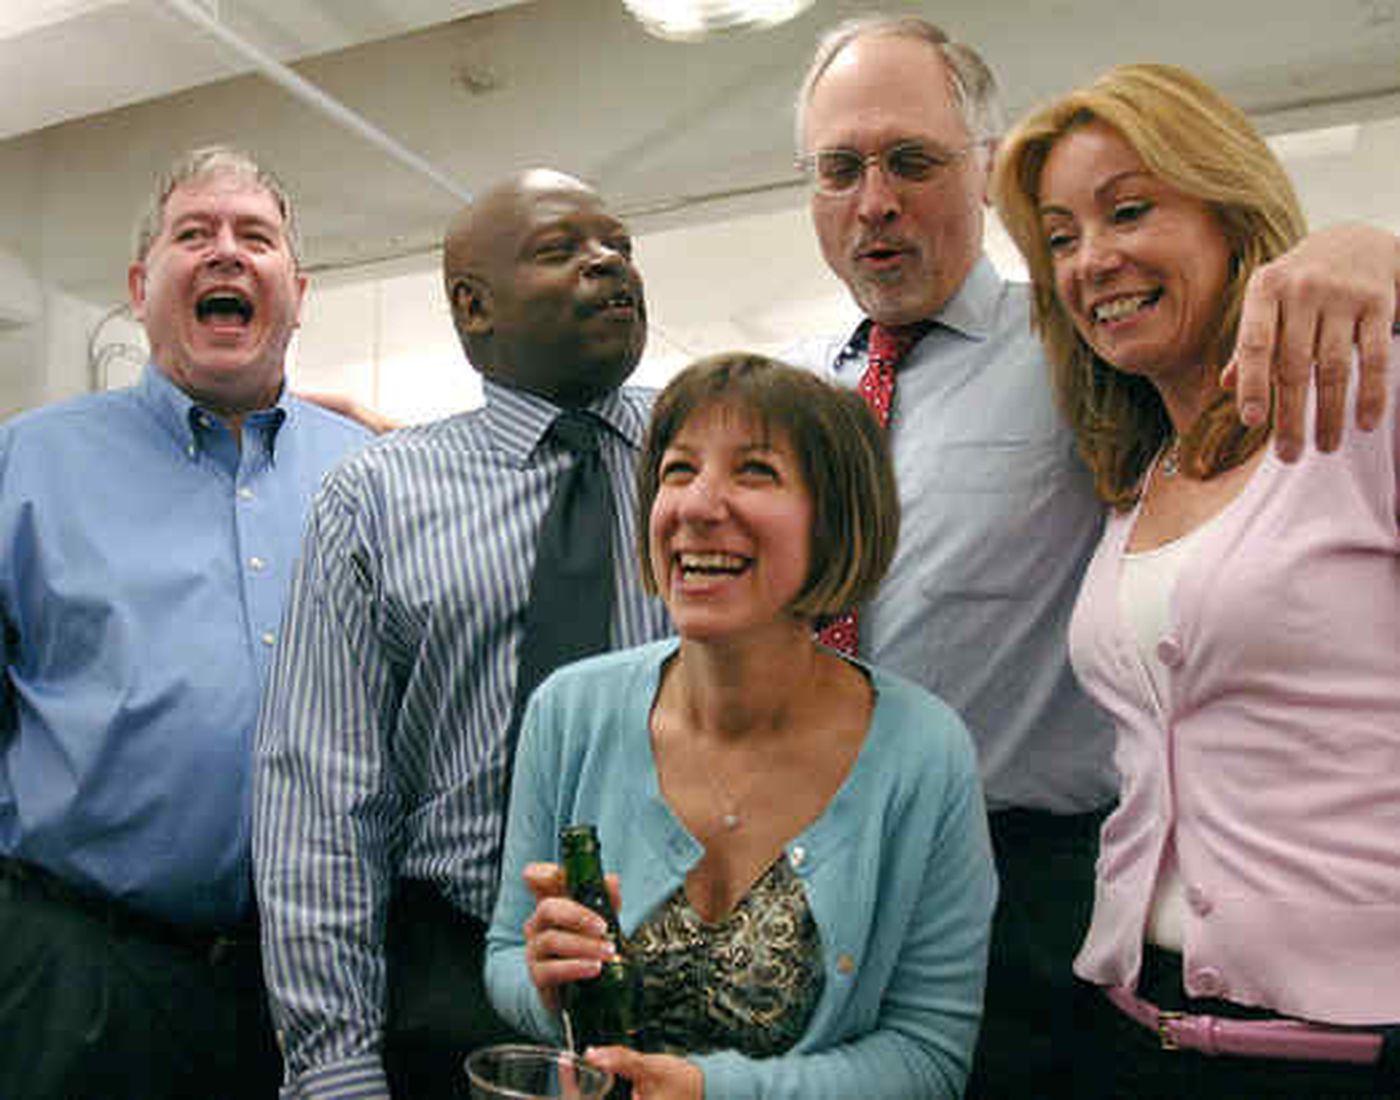 From left: Daily News managing editor Pat McLoone, editor Michael Days, reporter Wendy Ruderman, city editor Gar Joseph and reporter Barbara Laker bask in the glory of winning the 2010 Pulitzer Prize for investigative reporting.